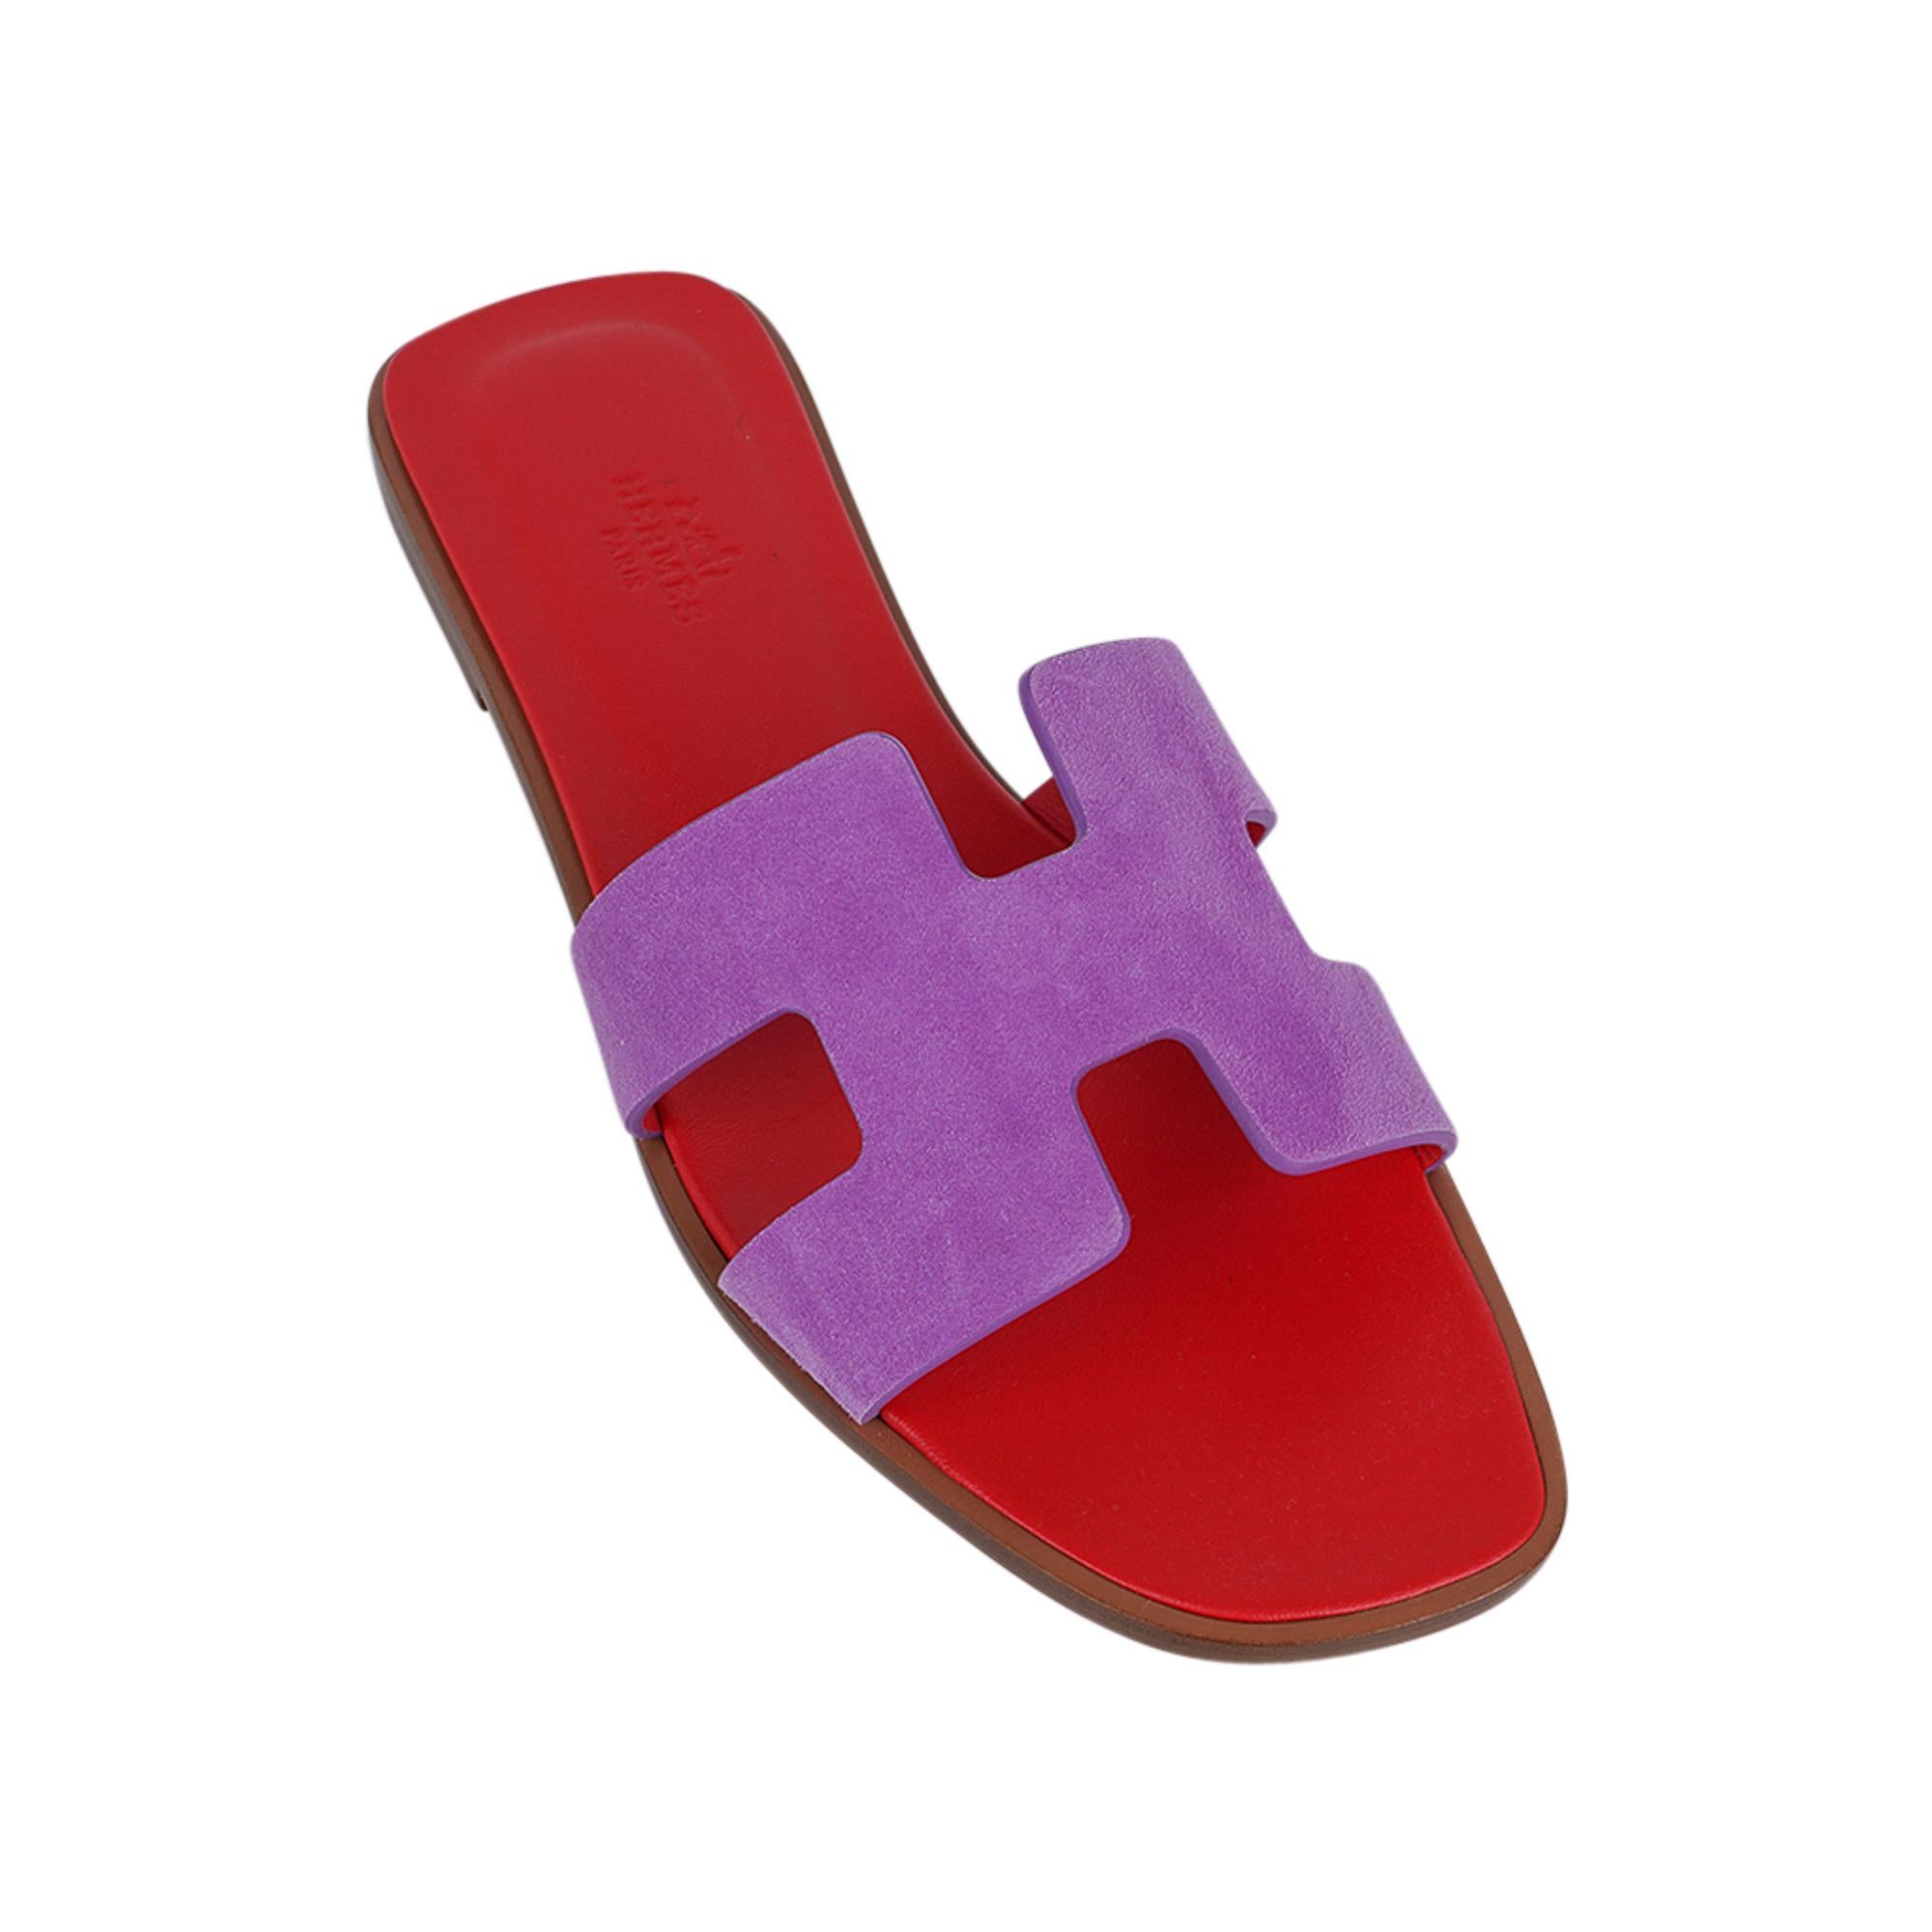 Mightychic offers Hermes Oran sandals featured in Parme Doblis.
This stunning limited edition Hermes Oran flat slide sandal is featured with a Ruby leather insole.
The iconic H cutout over the top of the foot.
Wood heel with leather sole.
Comes with